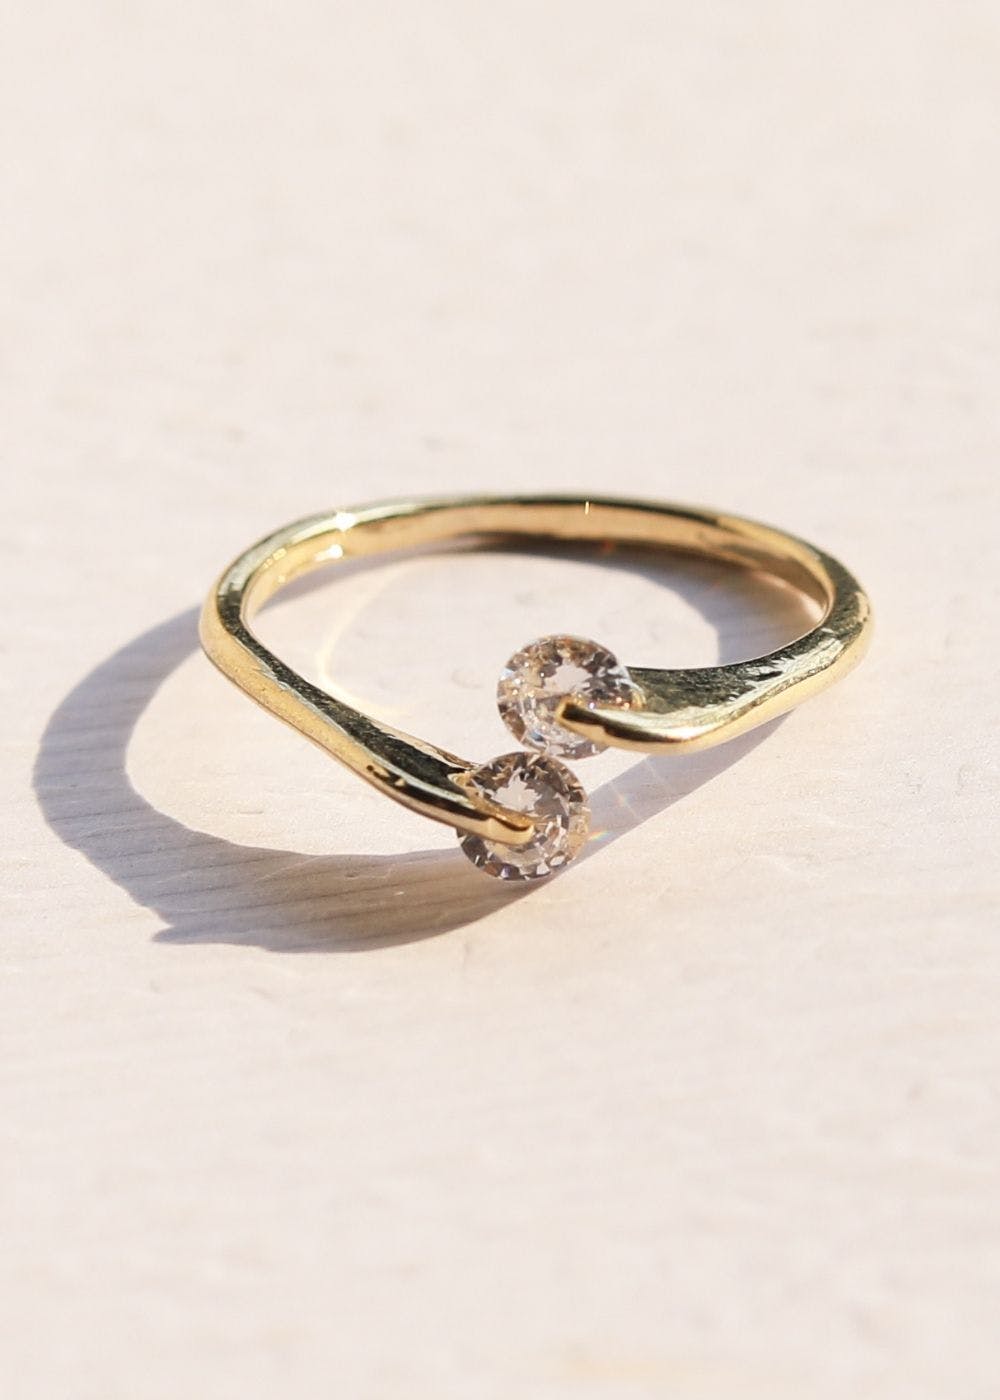 Premium Photo | Captivating close up shot of two wedding rings delicately  intertwined to symbolize the everlasting bond of love and commitment jewelry  gold diamond ring for anniversary valentine or engagement